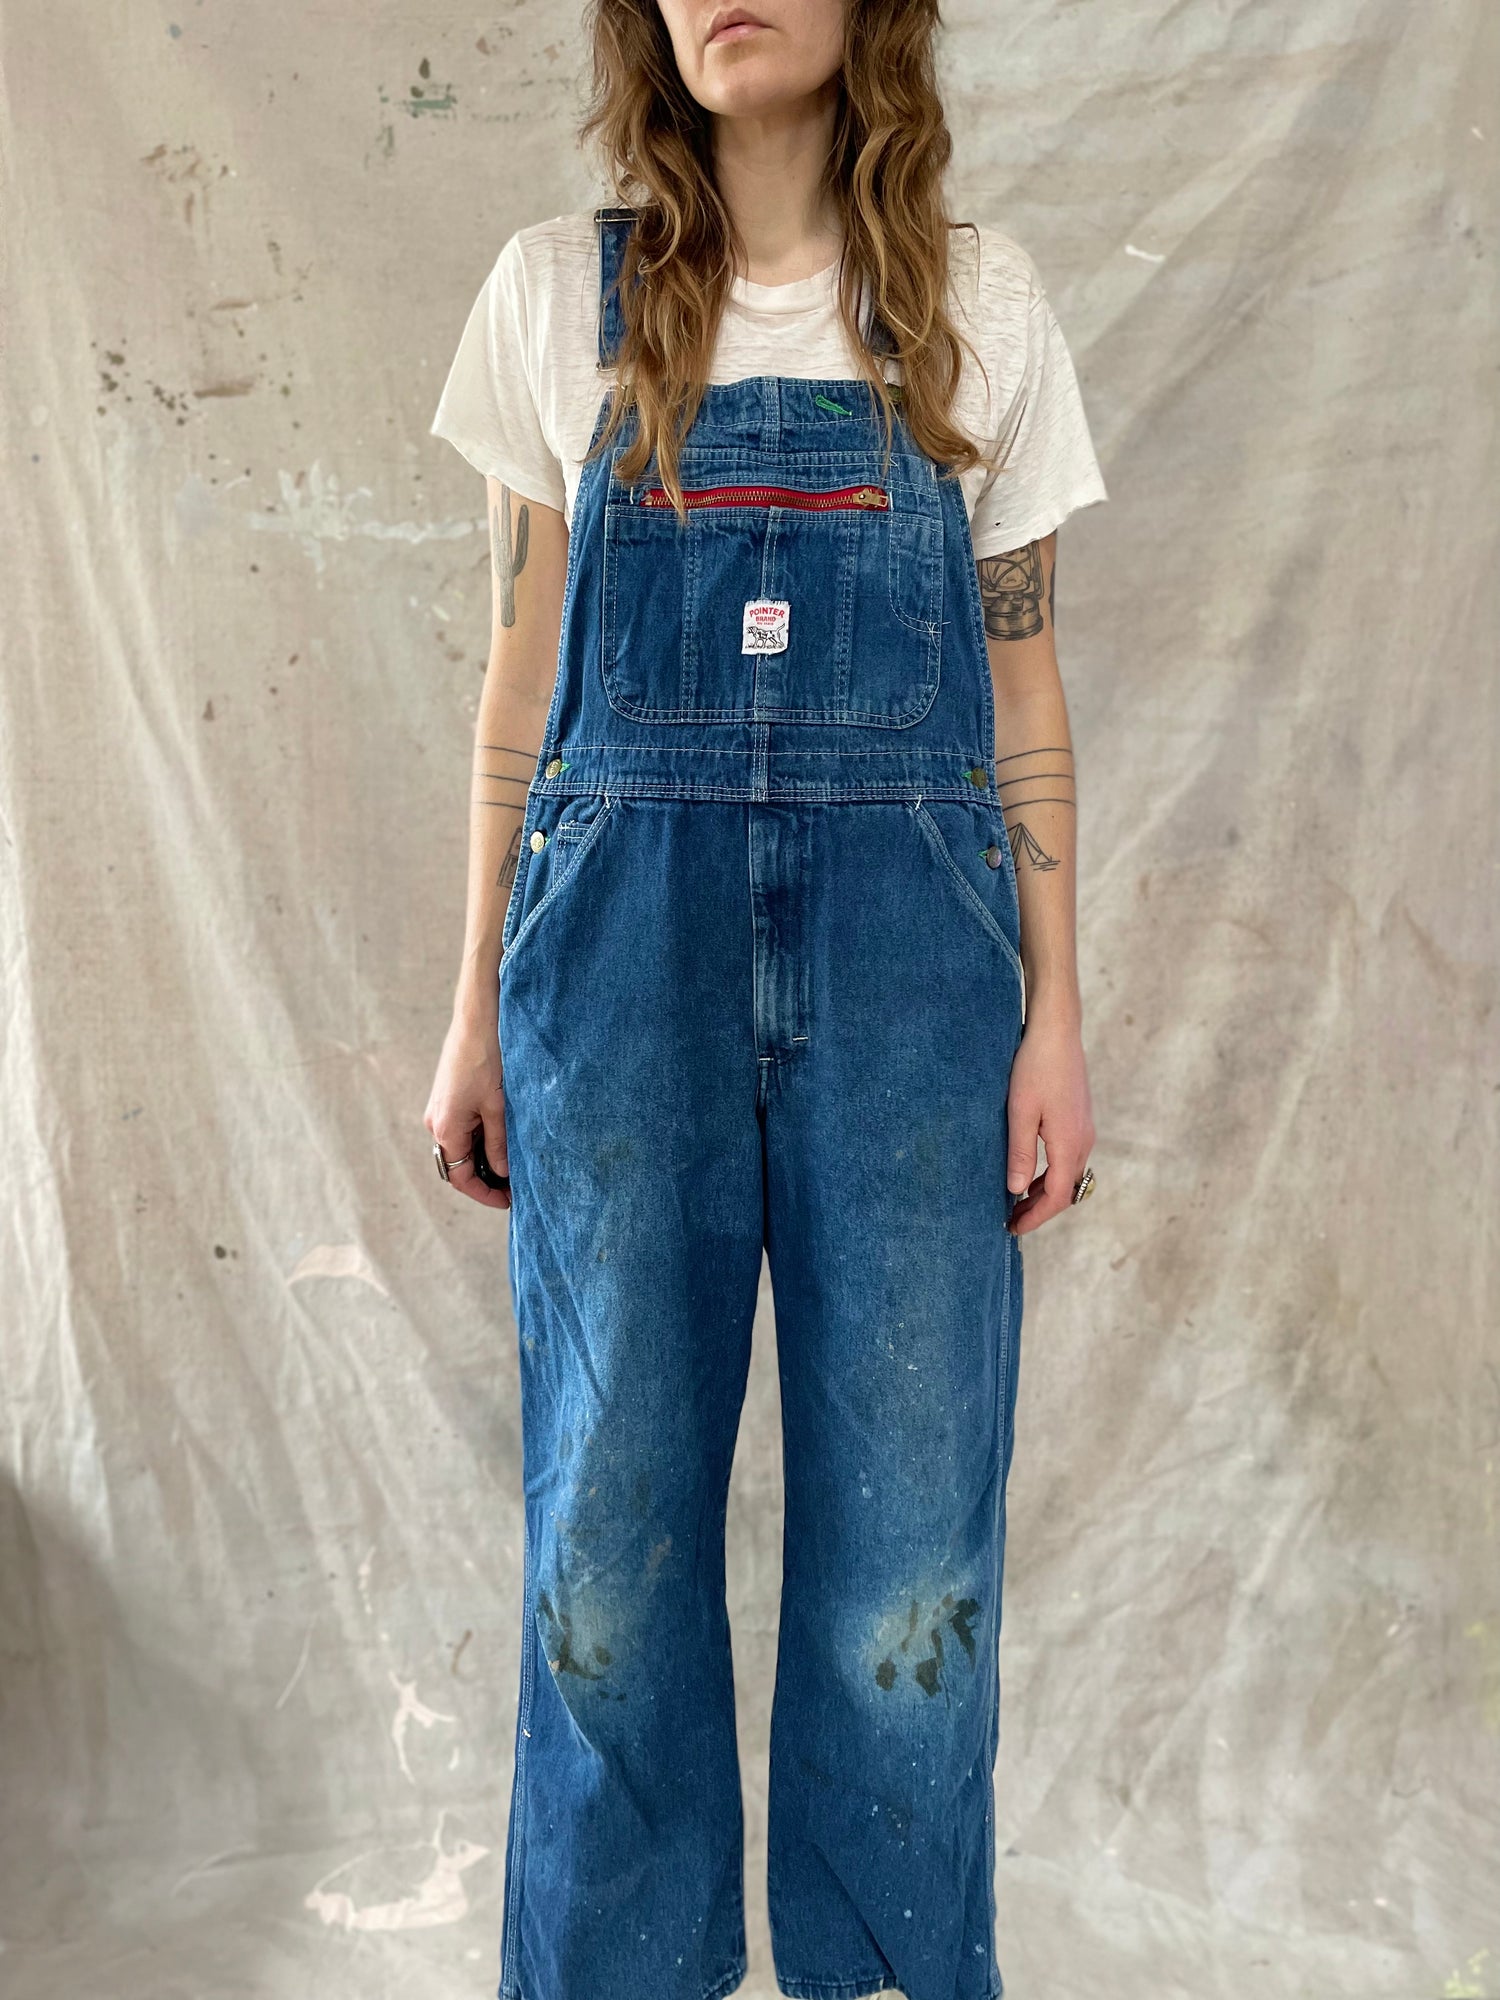 baxter sez: Pointer Brand Overalls: A Review